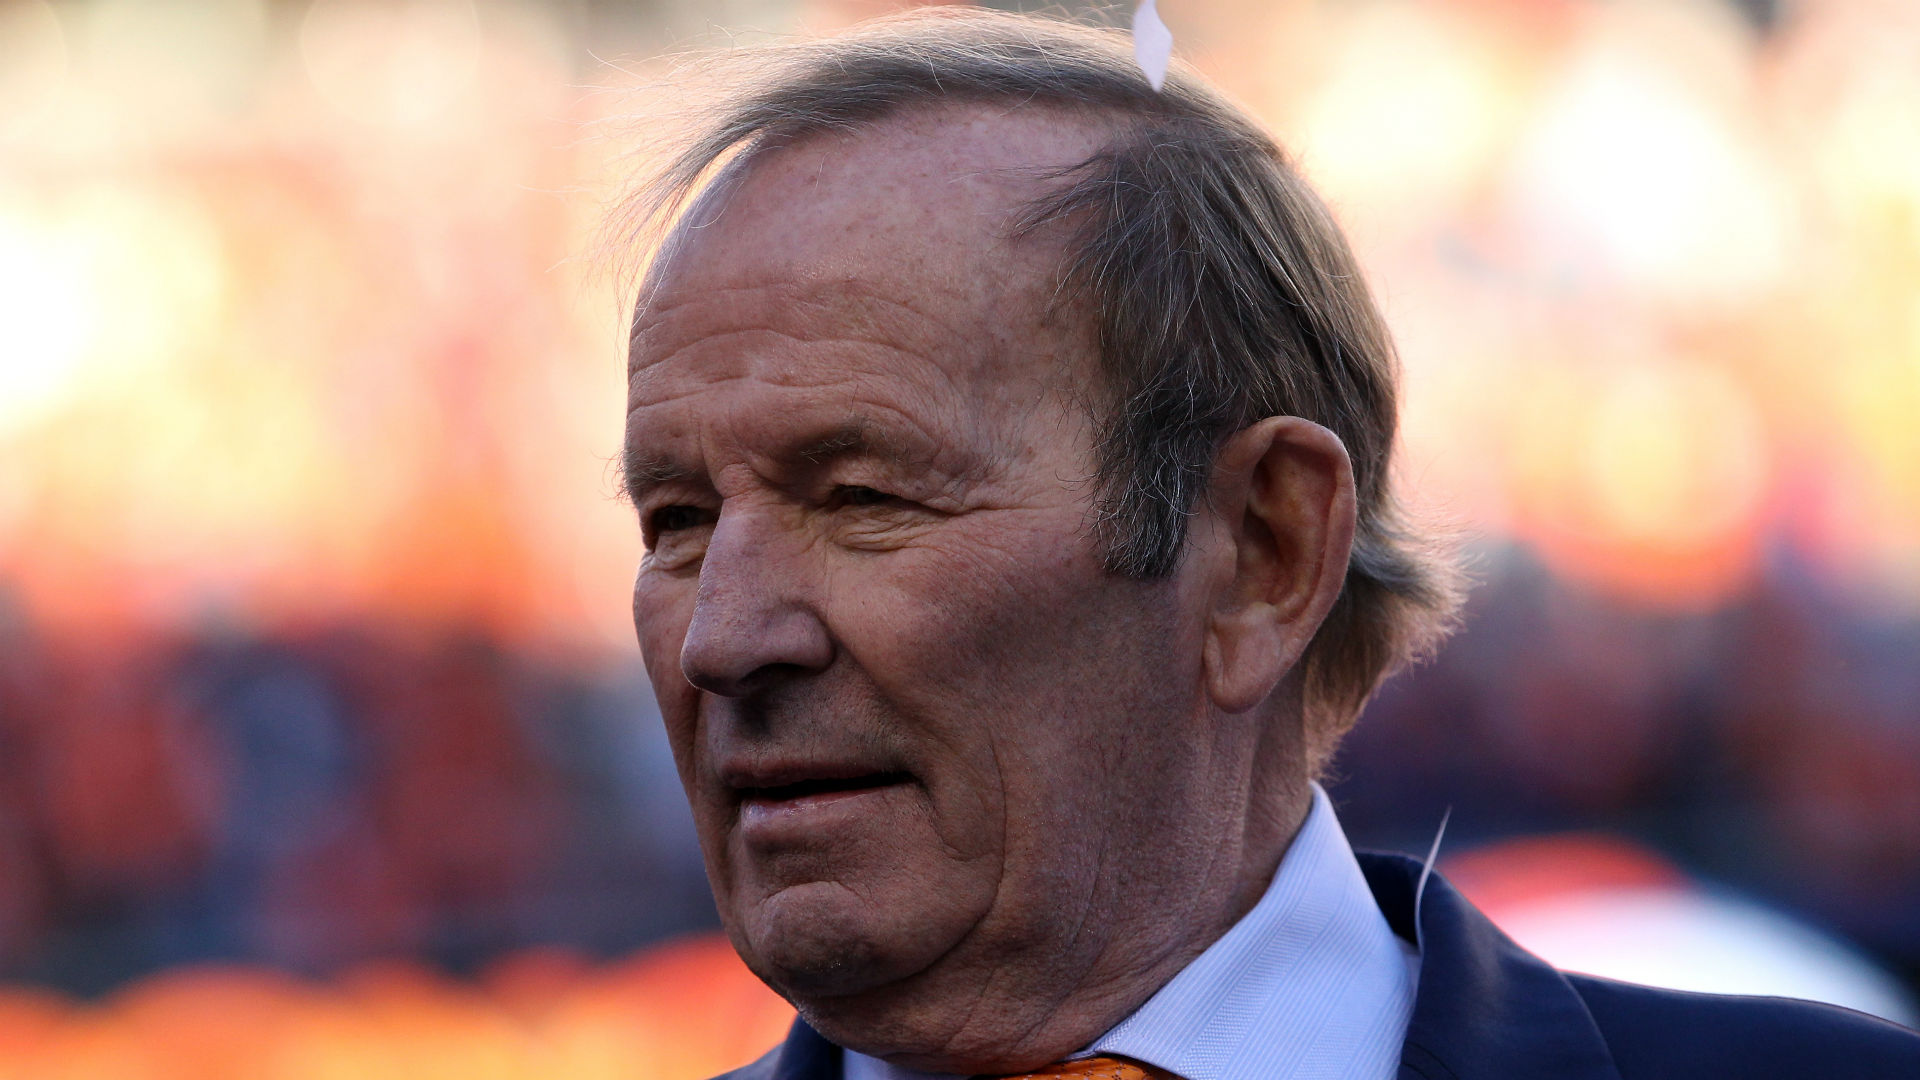 Pat Bowlen passed away on Thursday following a battle with Alzheimer's, his family announced via the Denver Broncos' website.